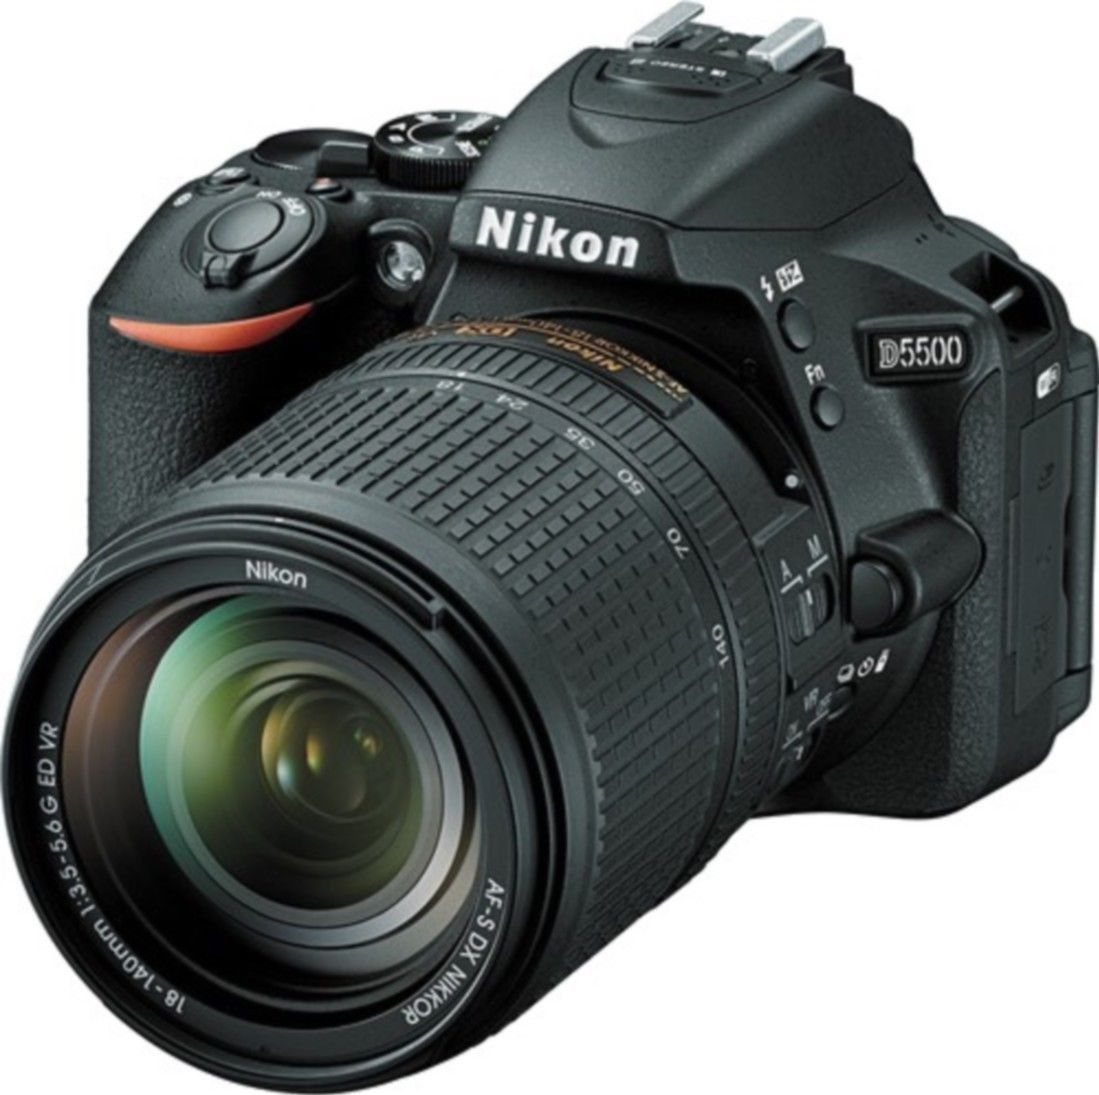  Nikon  D5500 DSLR Camera  with 18 140mm Lens Best Price  in 